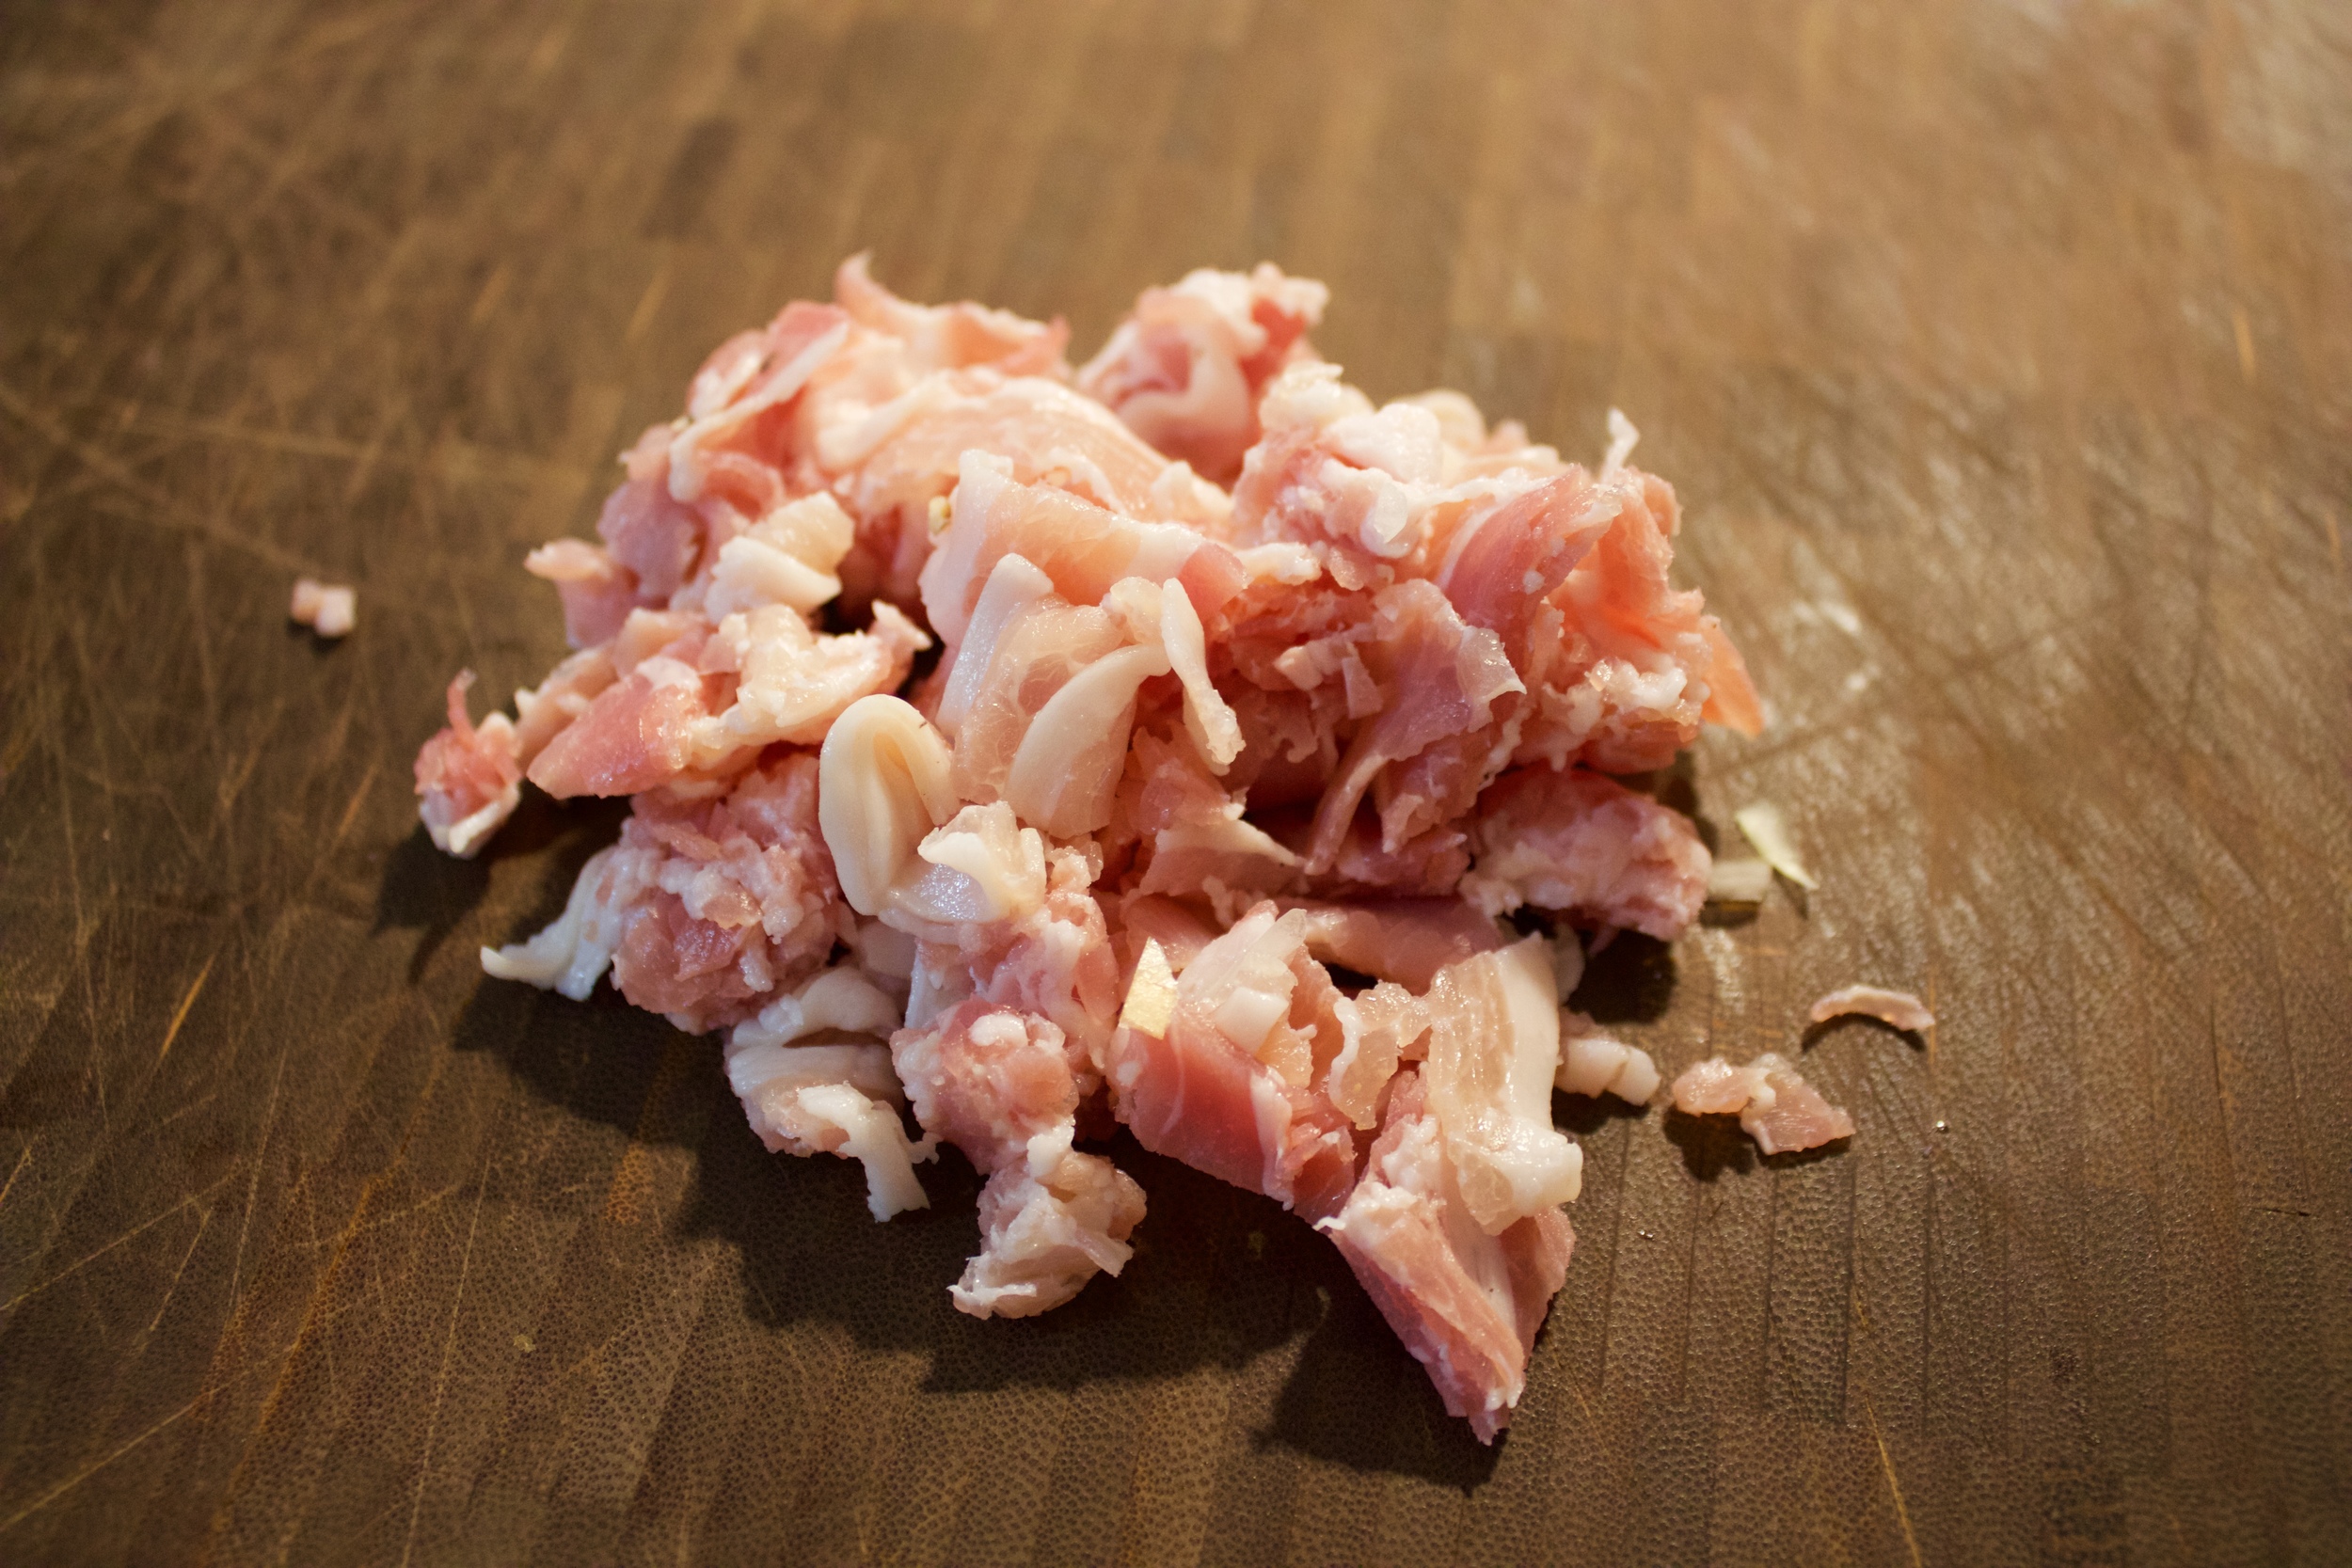 4. Optional: Chop up a couple slices of pancetta or bacon